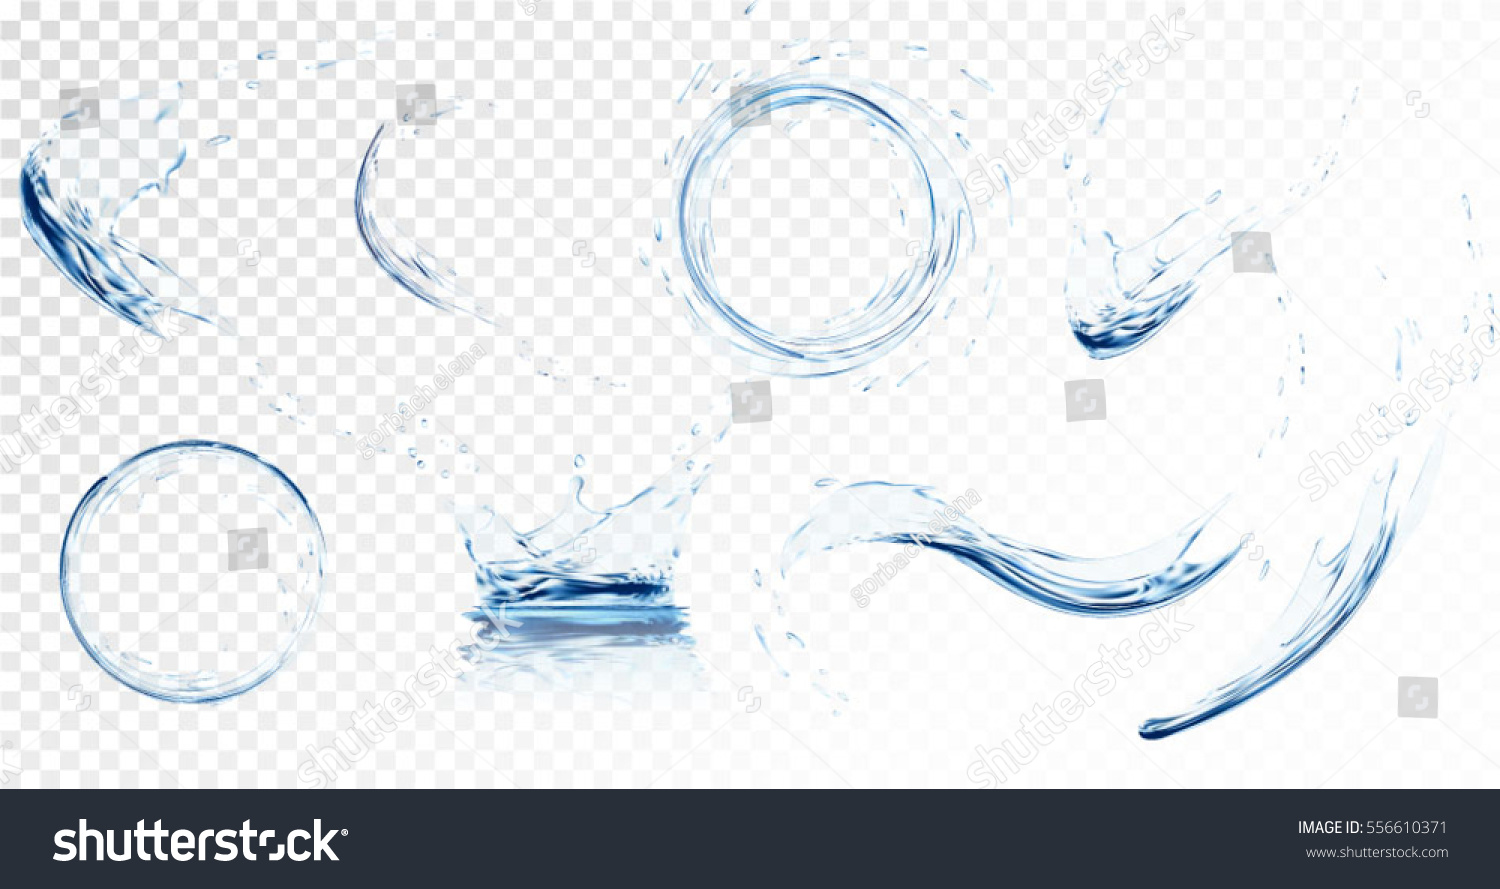 Set of transparent water splashes, water drops and crown from falling into the water in light blue colors, isolated on transparent background. Transparency only in vector file #556610371